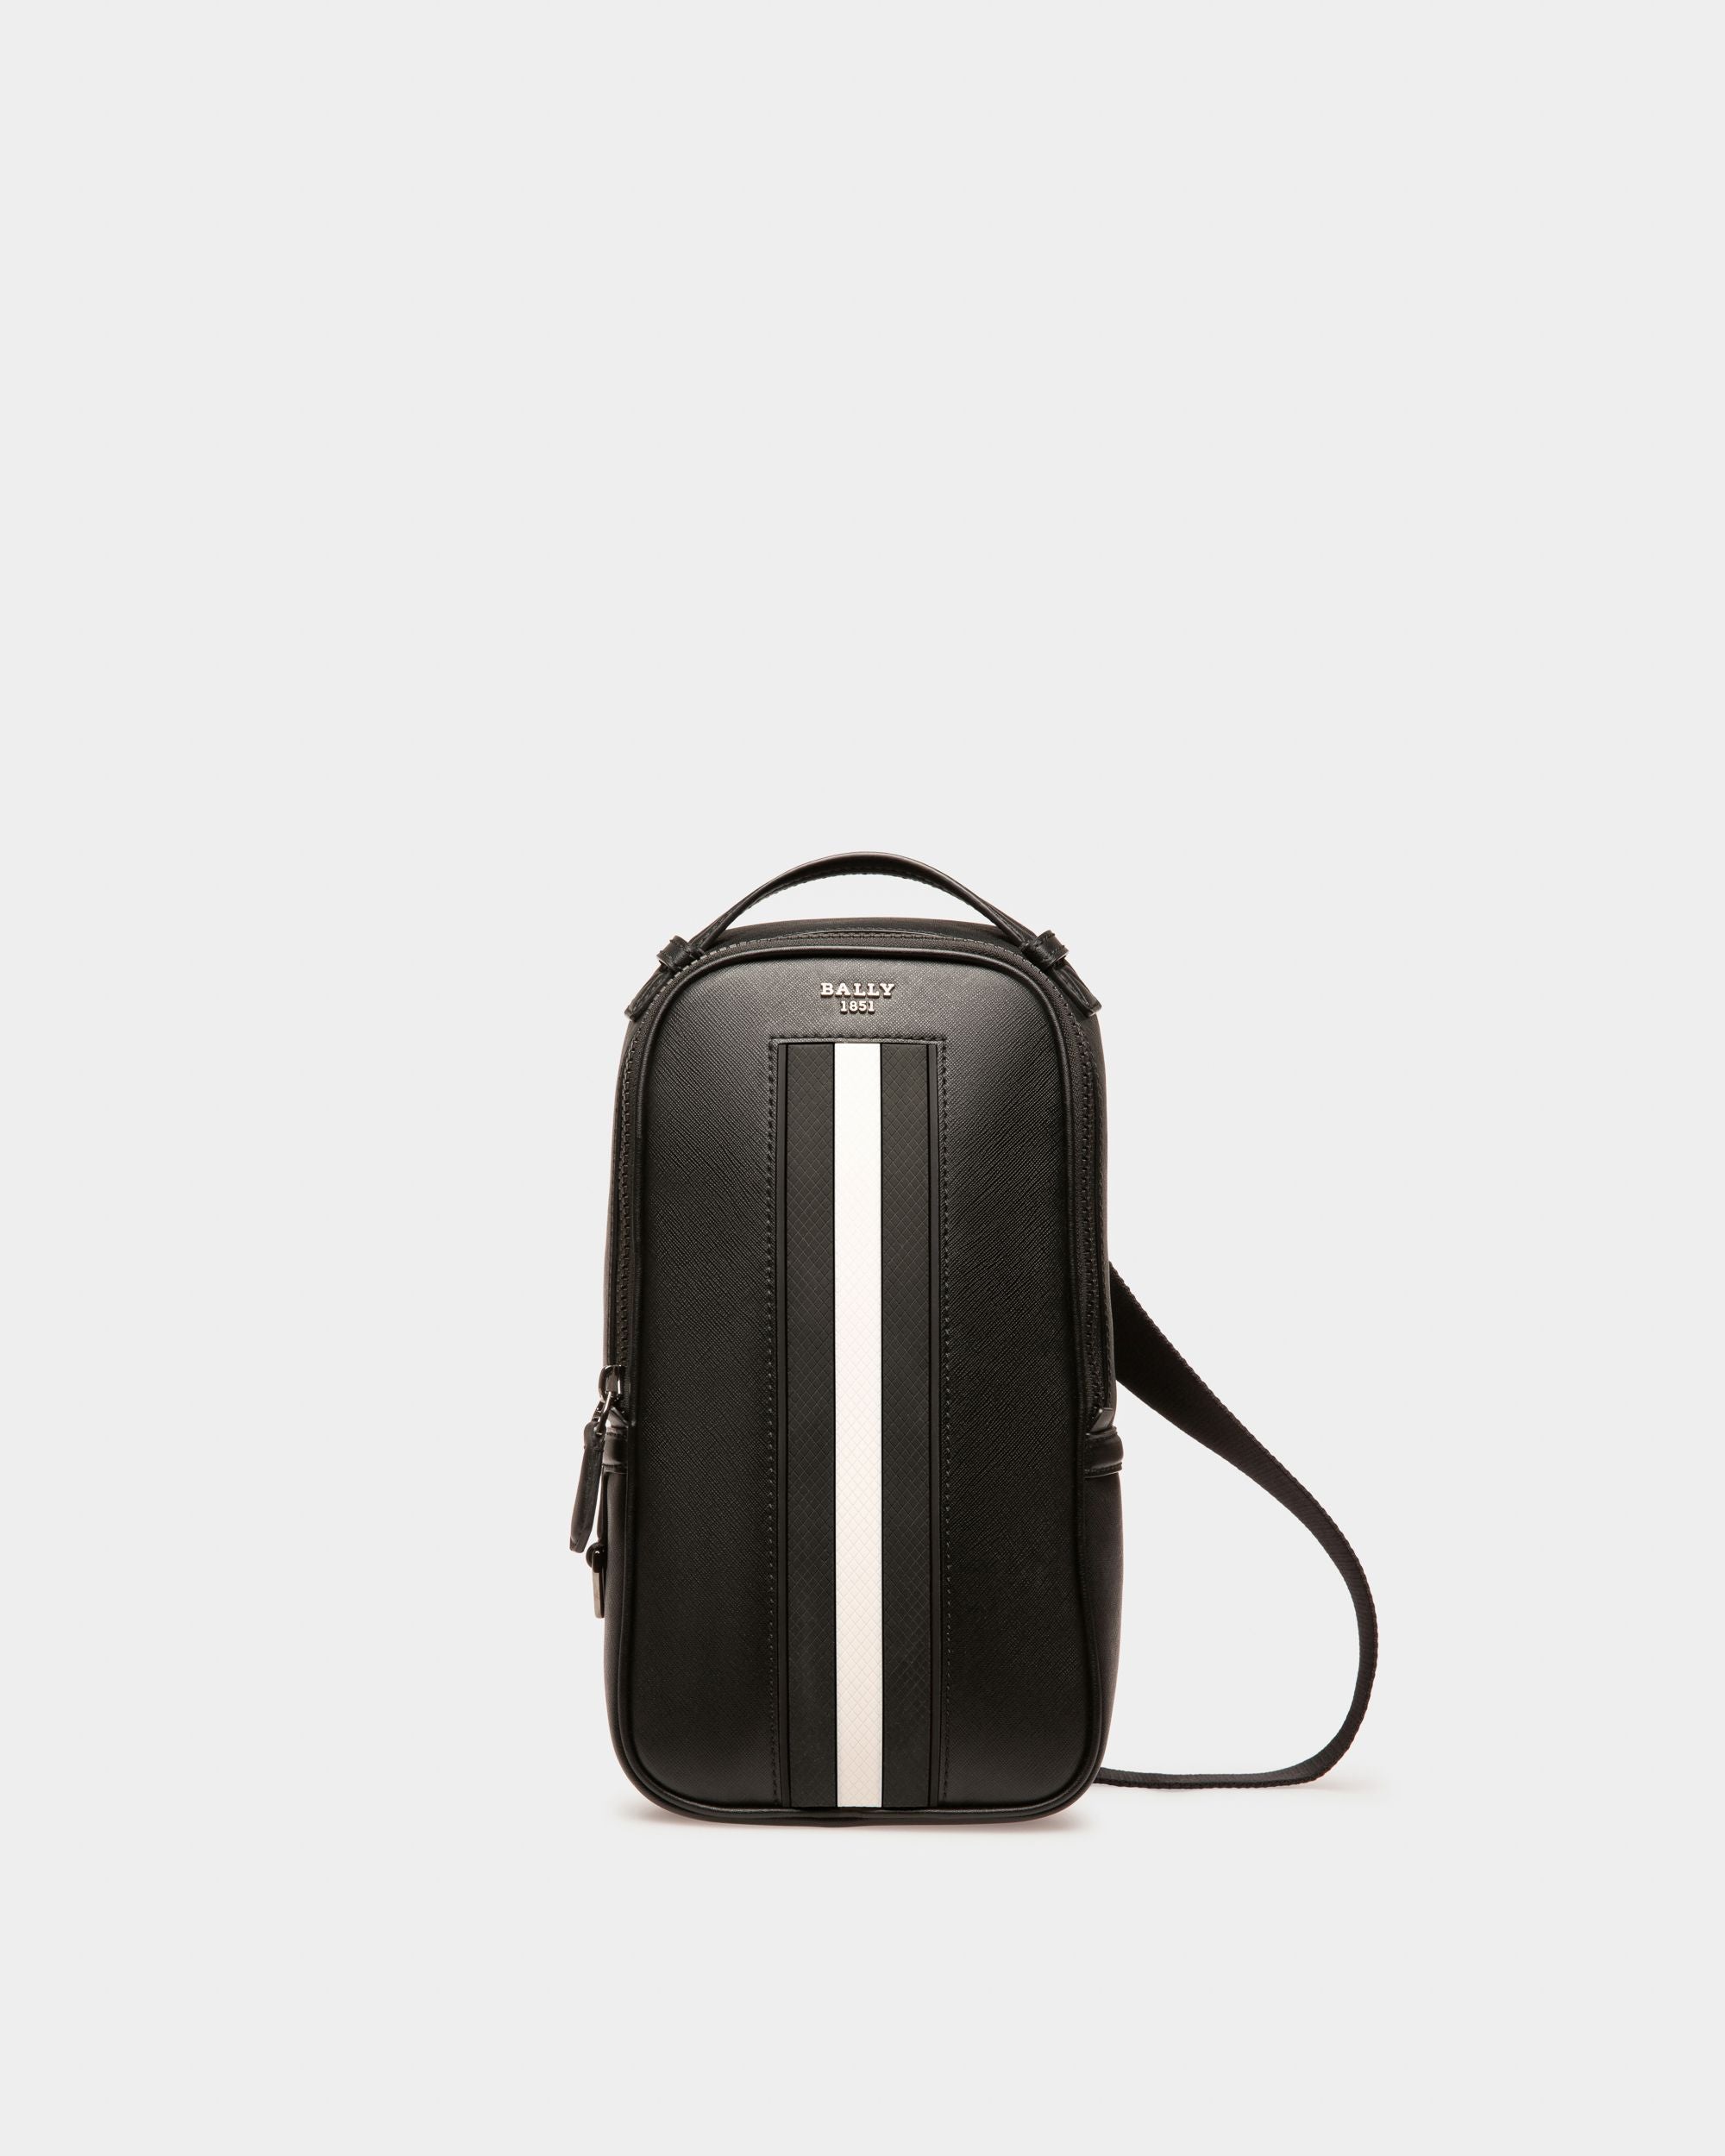 Men's Malikho Recycled Leather Sling Bag In Black | Bally | Still Life Front